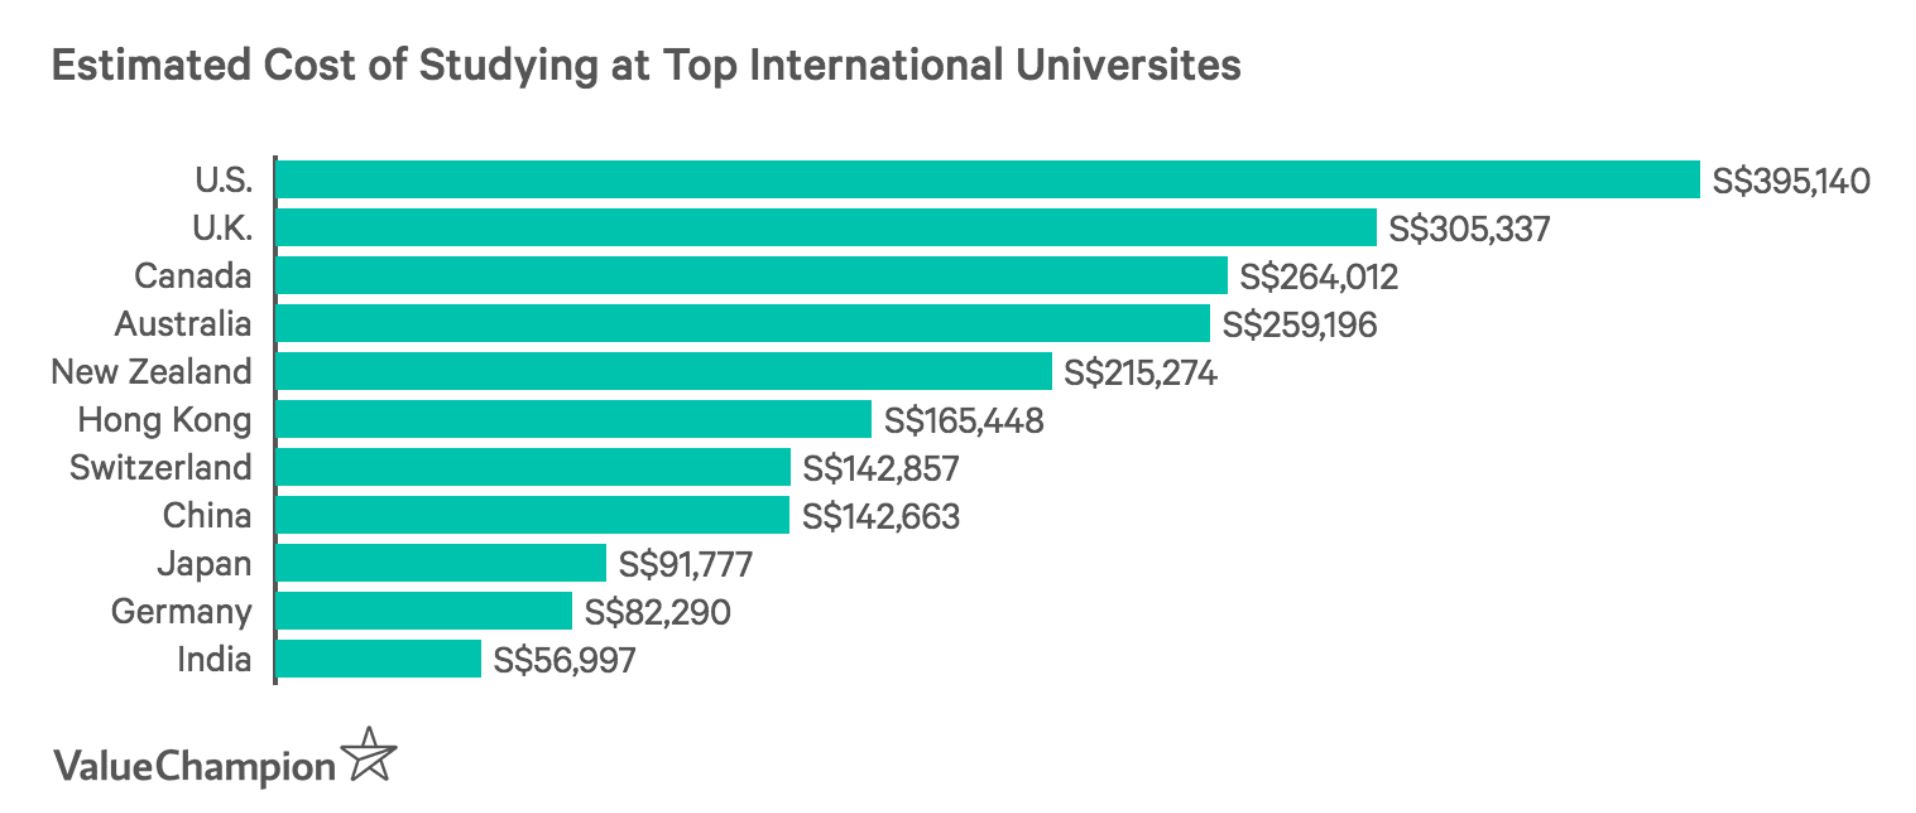 How Does Germany Fund University Education?